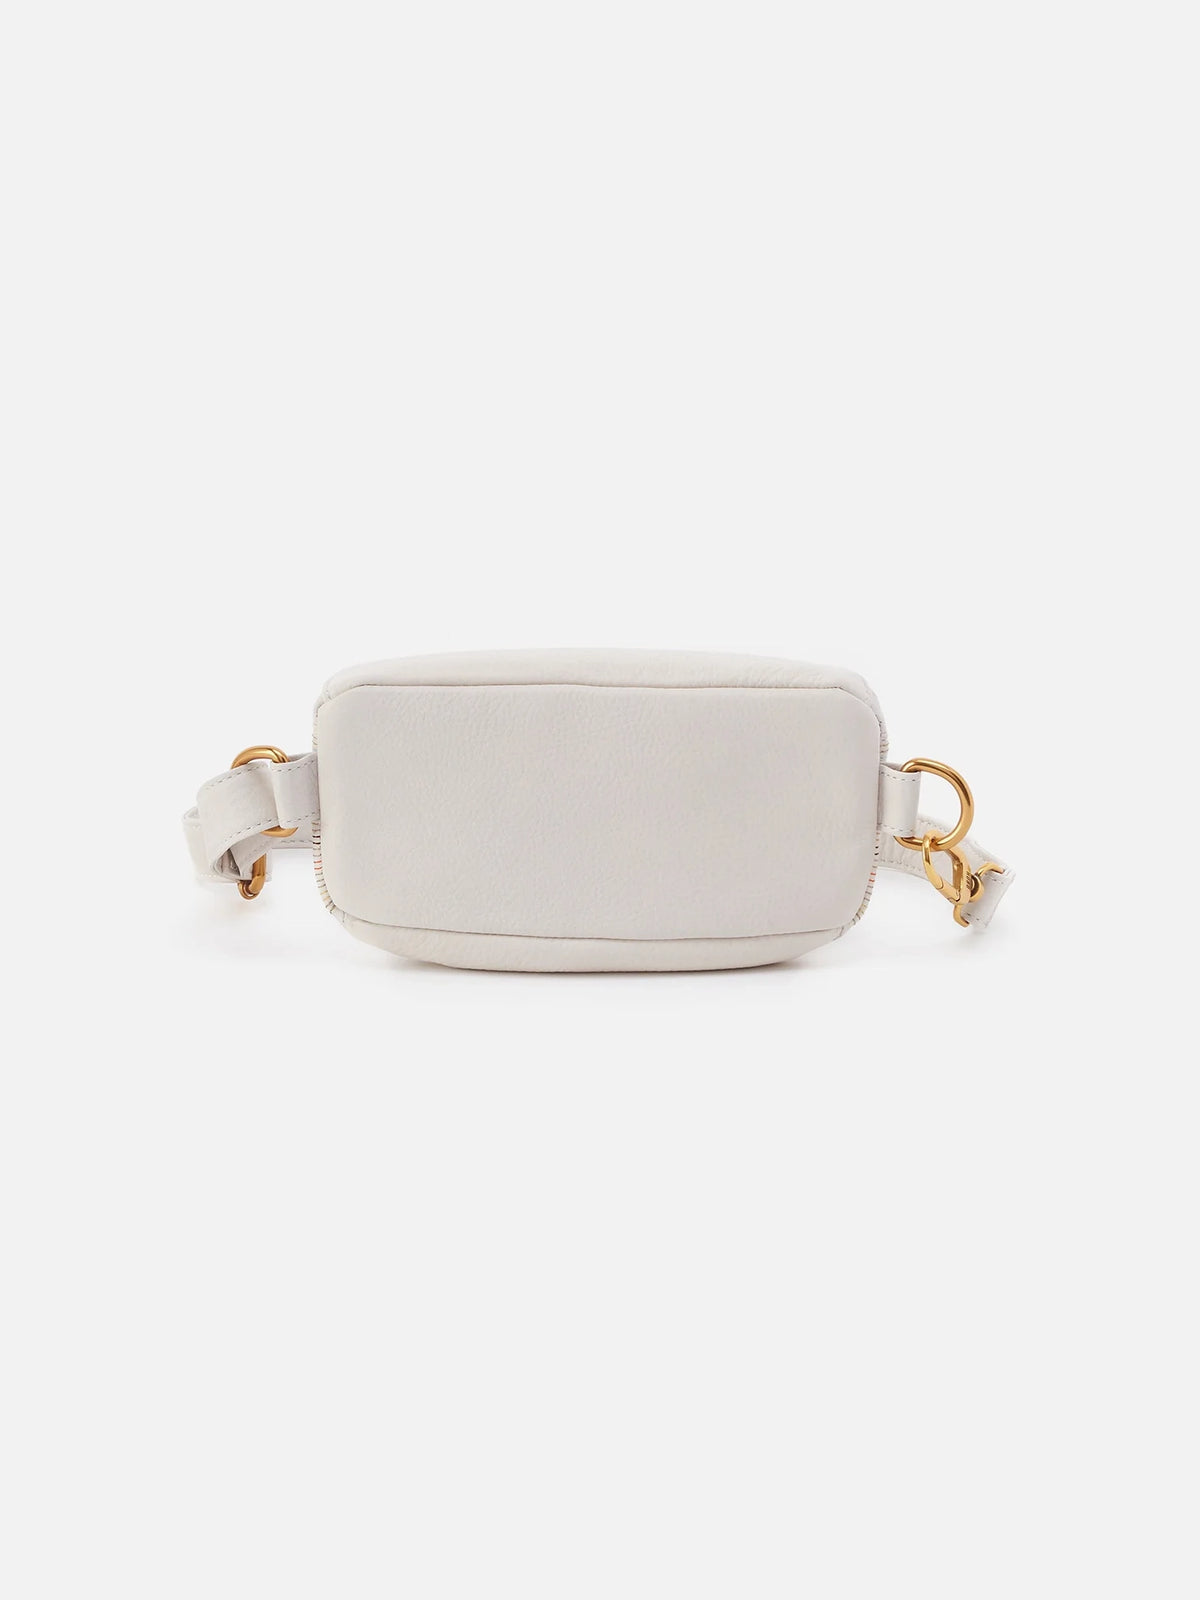 hobo fern belt bag in white multi stitched pebbled leather